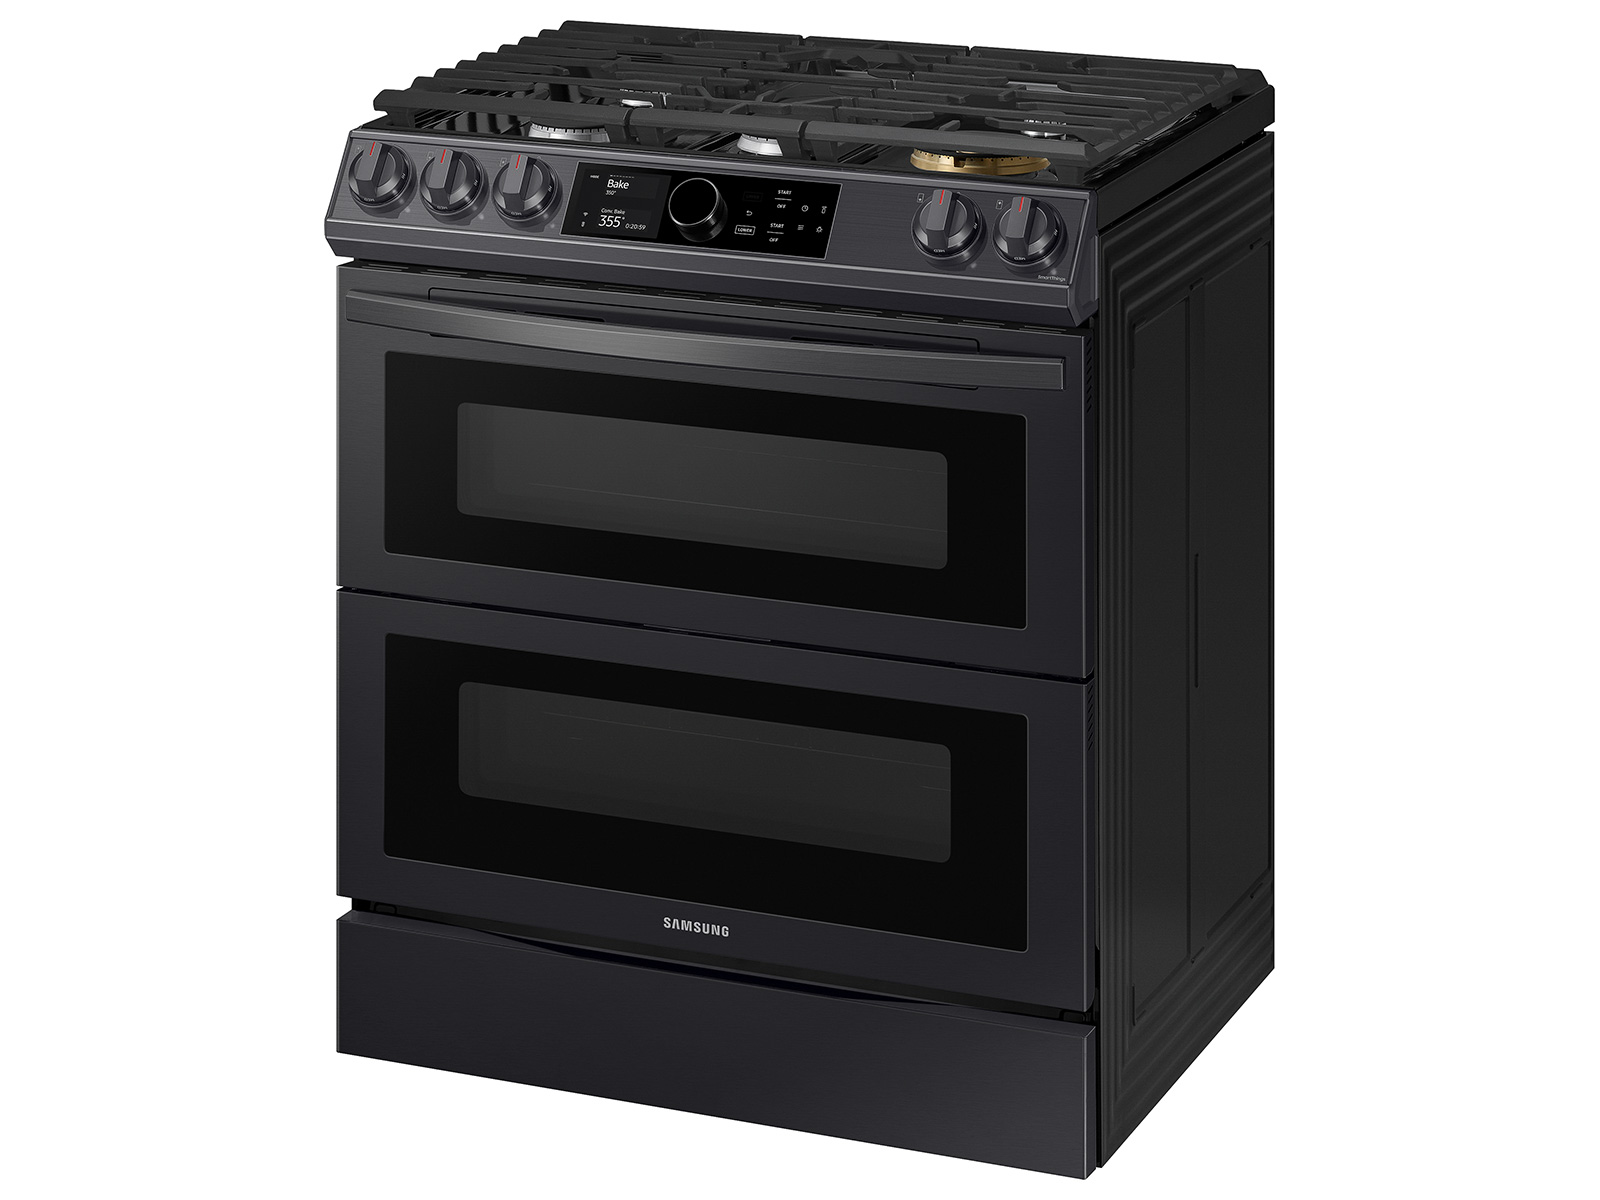 Viking 5 Series 48 in. 7.3 cu. ft. Convection Double Oven Freestanding Dual  Fuel Range with 6 Sealed Burners & Griddle - White